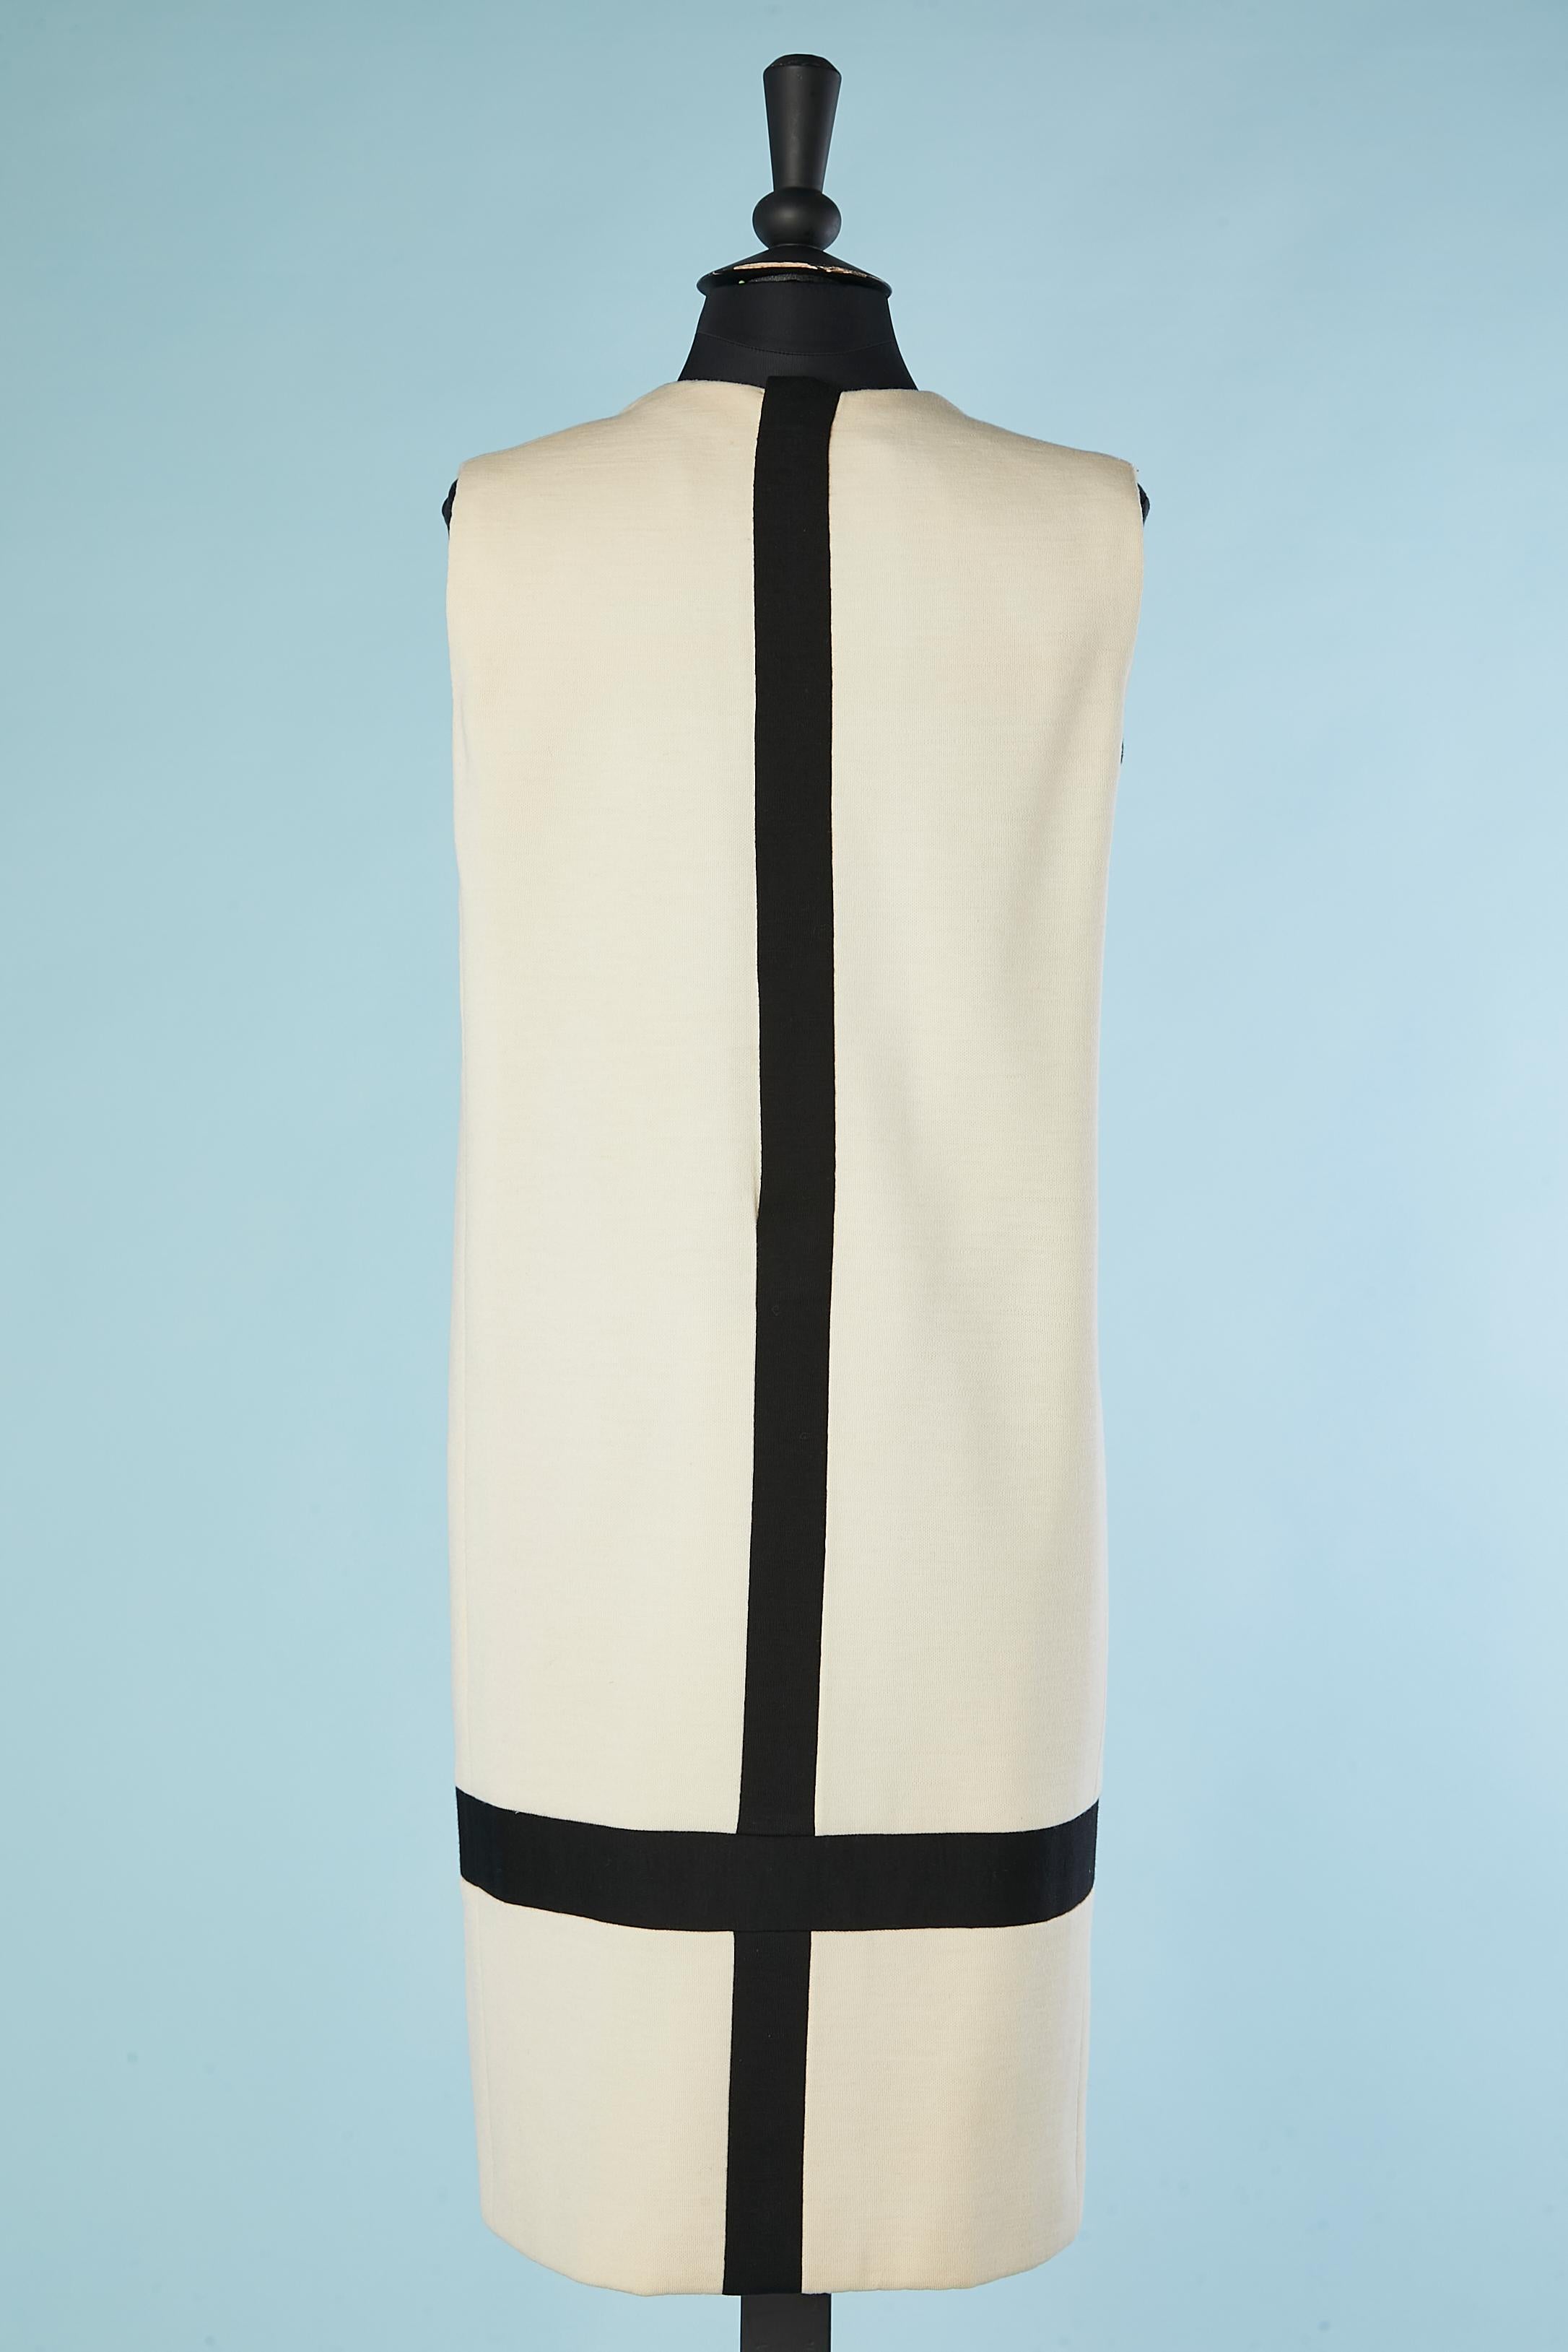 Women's Iconic Mondrian dress in black and white wool jersey Yves Saint Laurent FW 1965